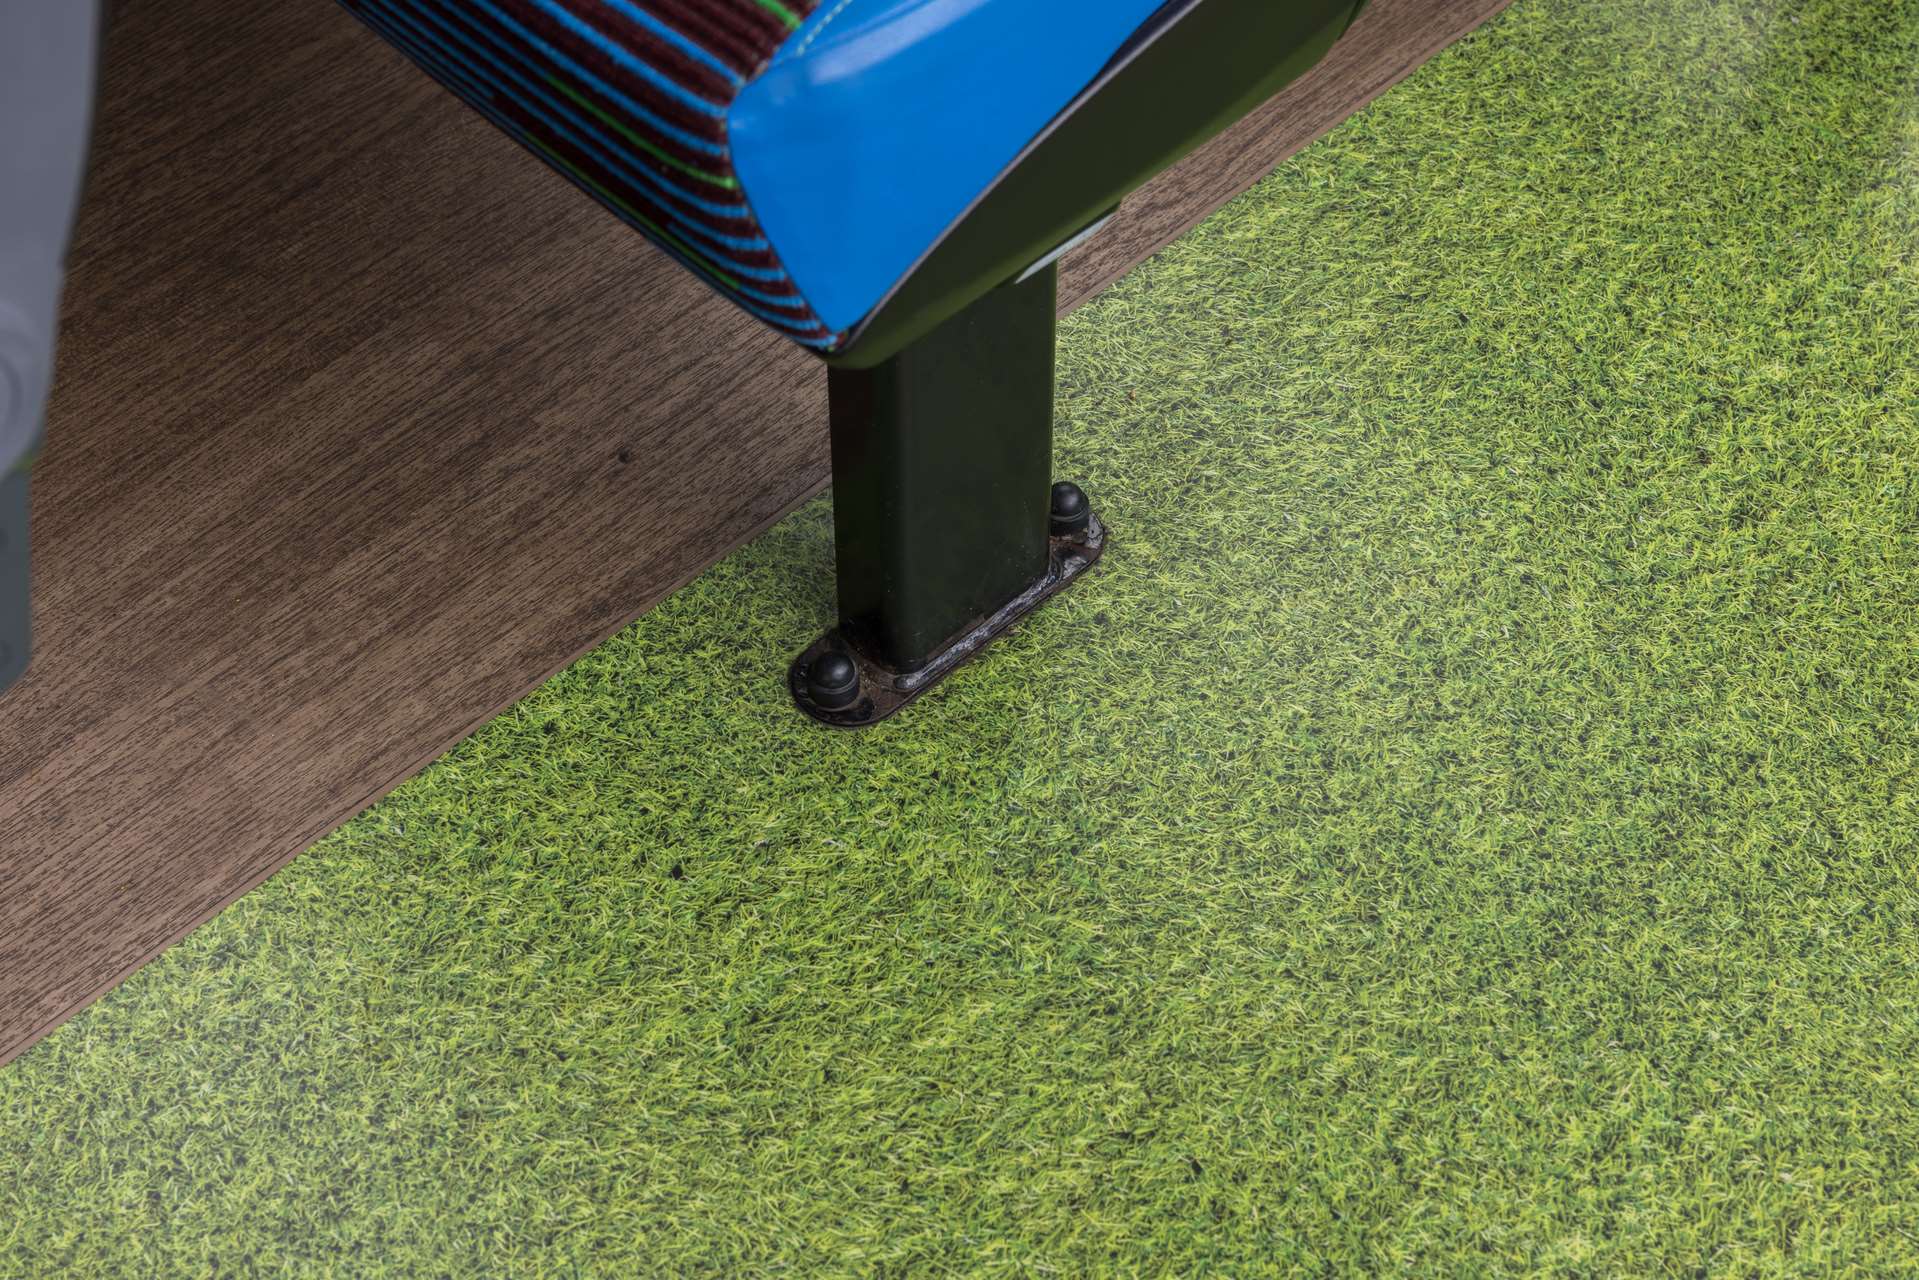 Altro Transflor Metris Custom in Grass 1 installed with Altro Transflor Wood on the Go North East Voltra fleet